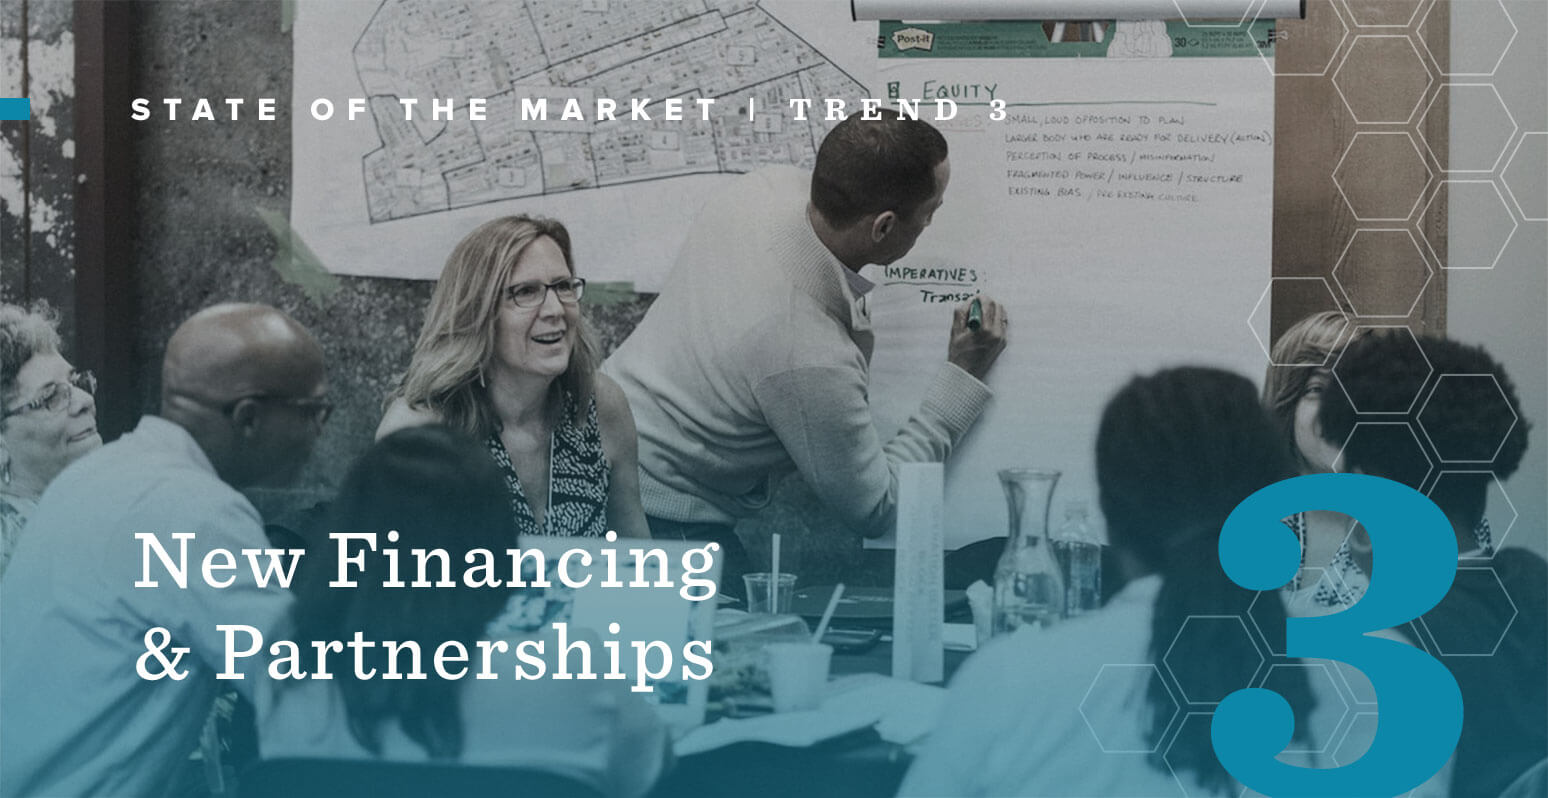 State of the Market: Trend 3 - New Financing & Partnerships